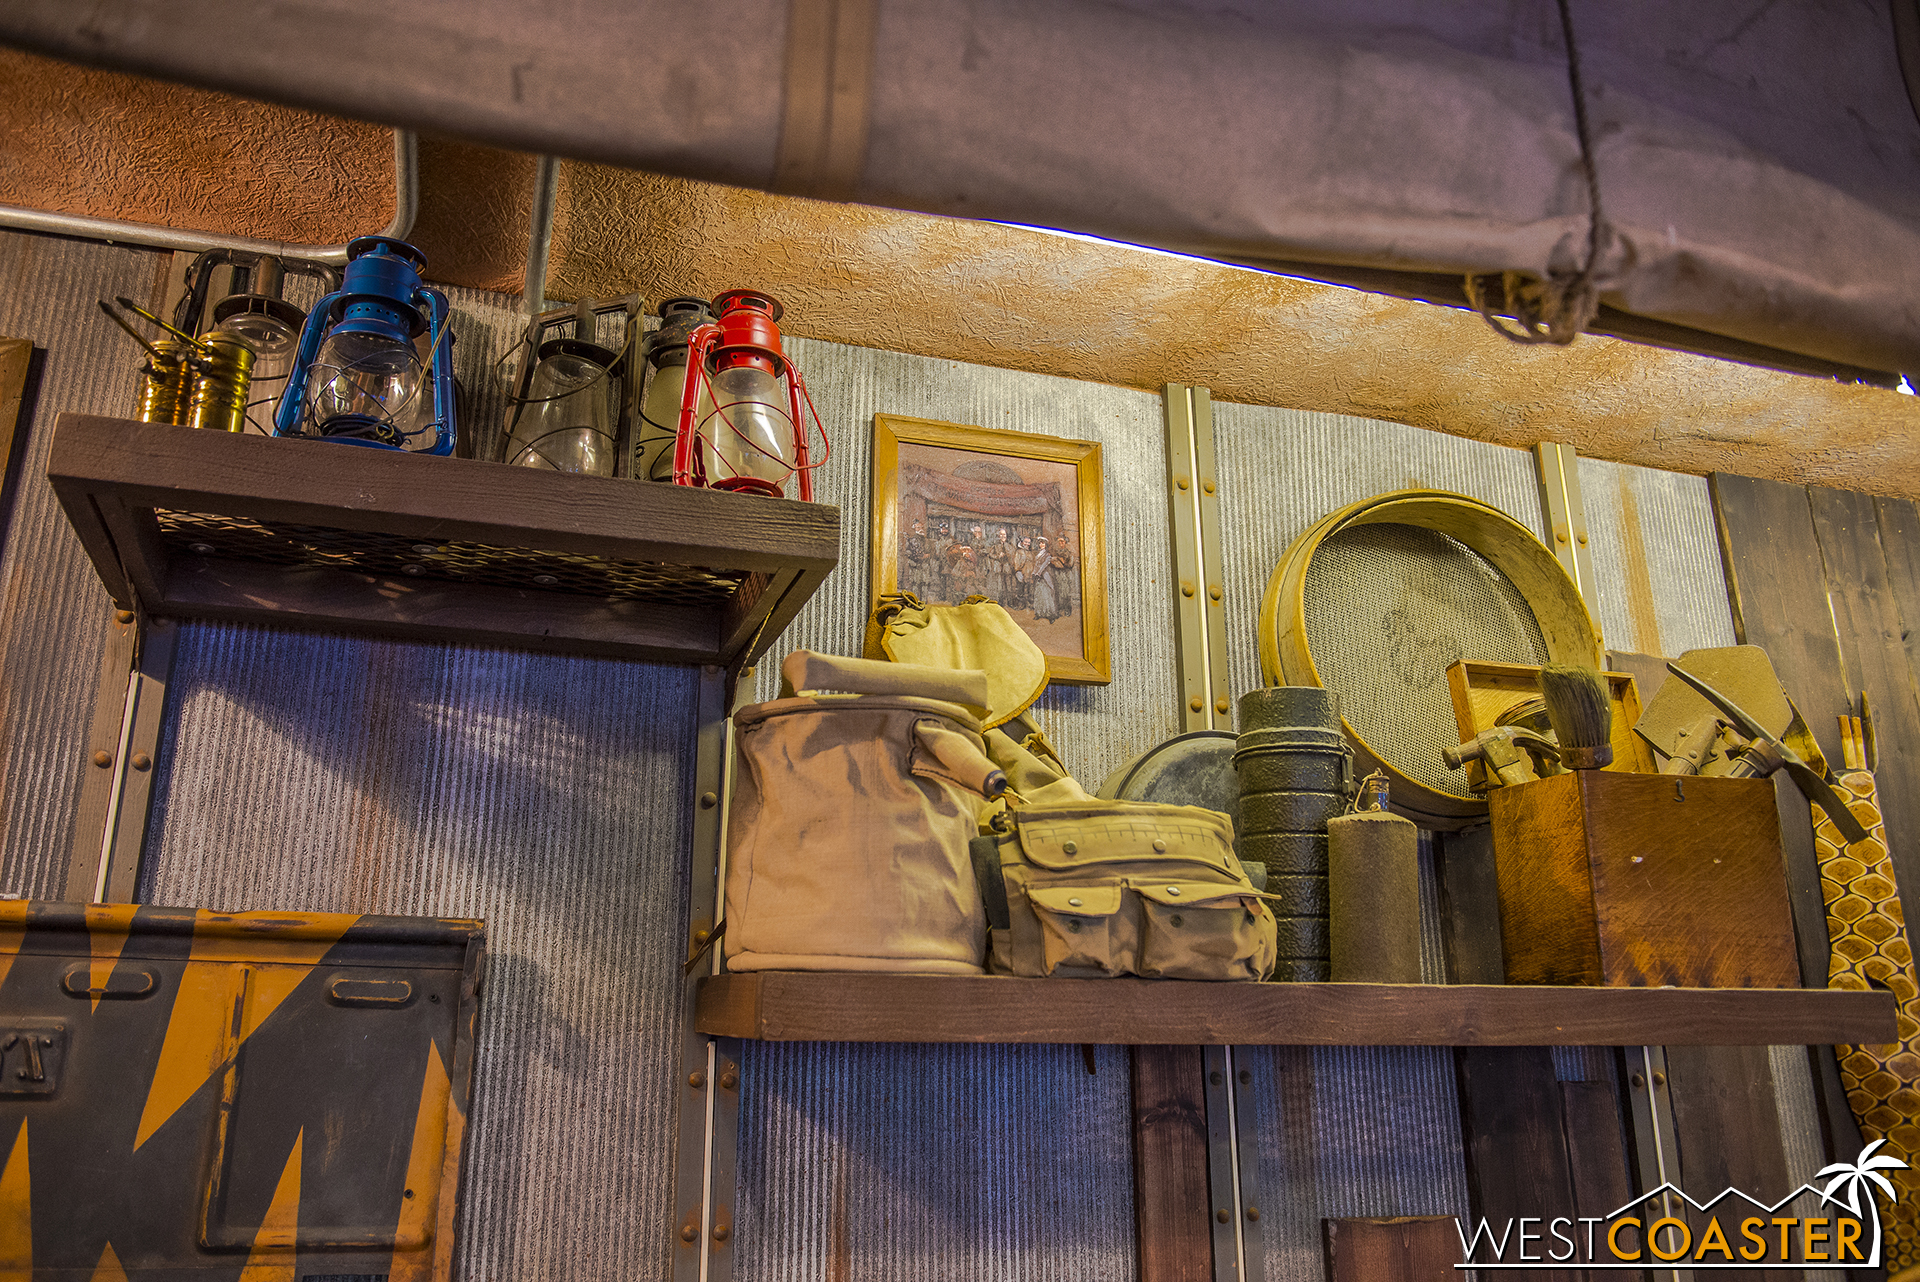  There are easter eggs hidden amongst the theming, though. 